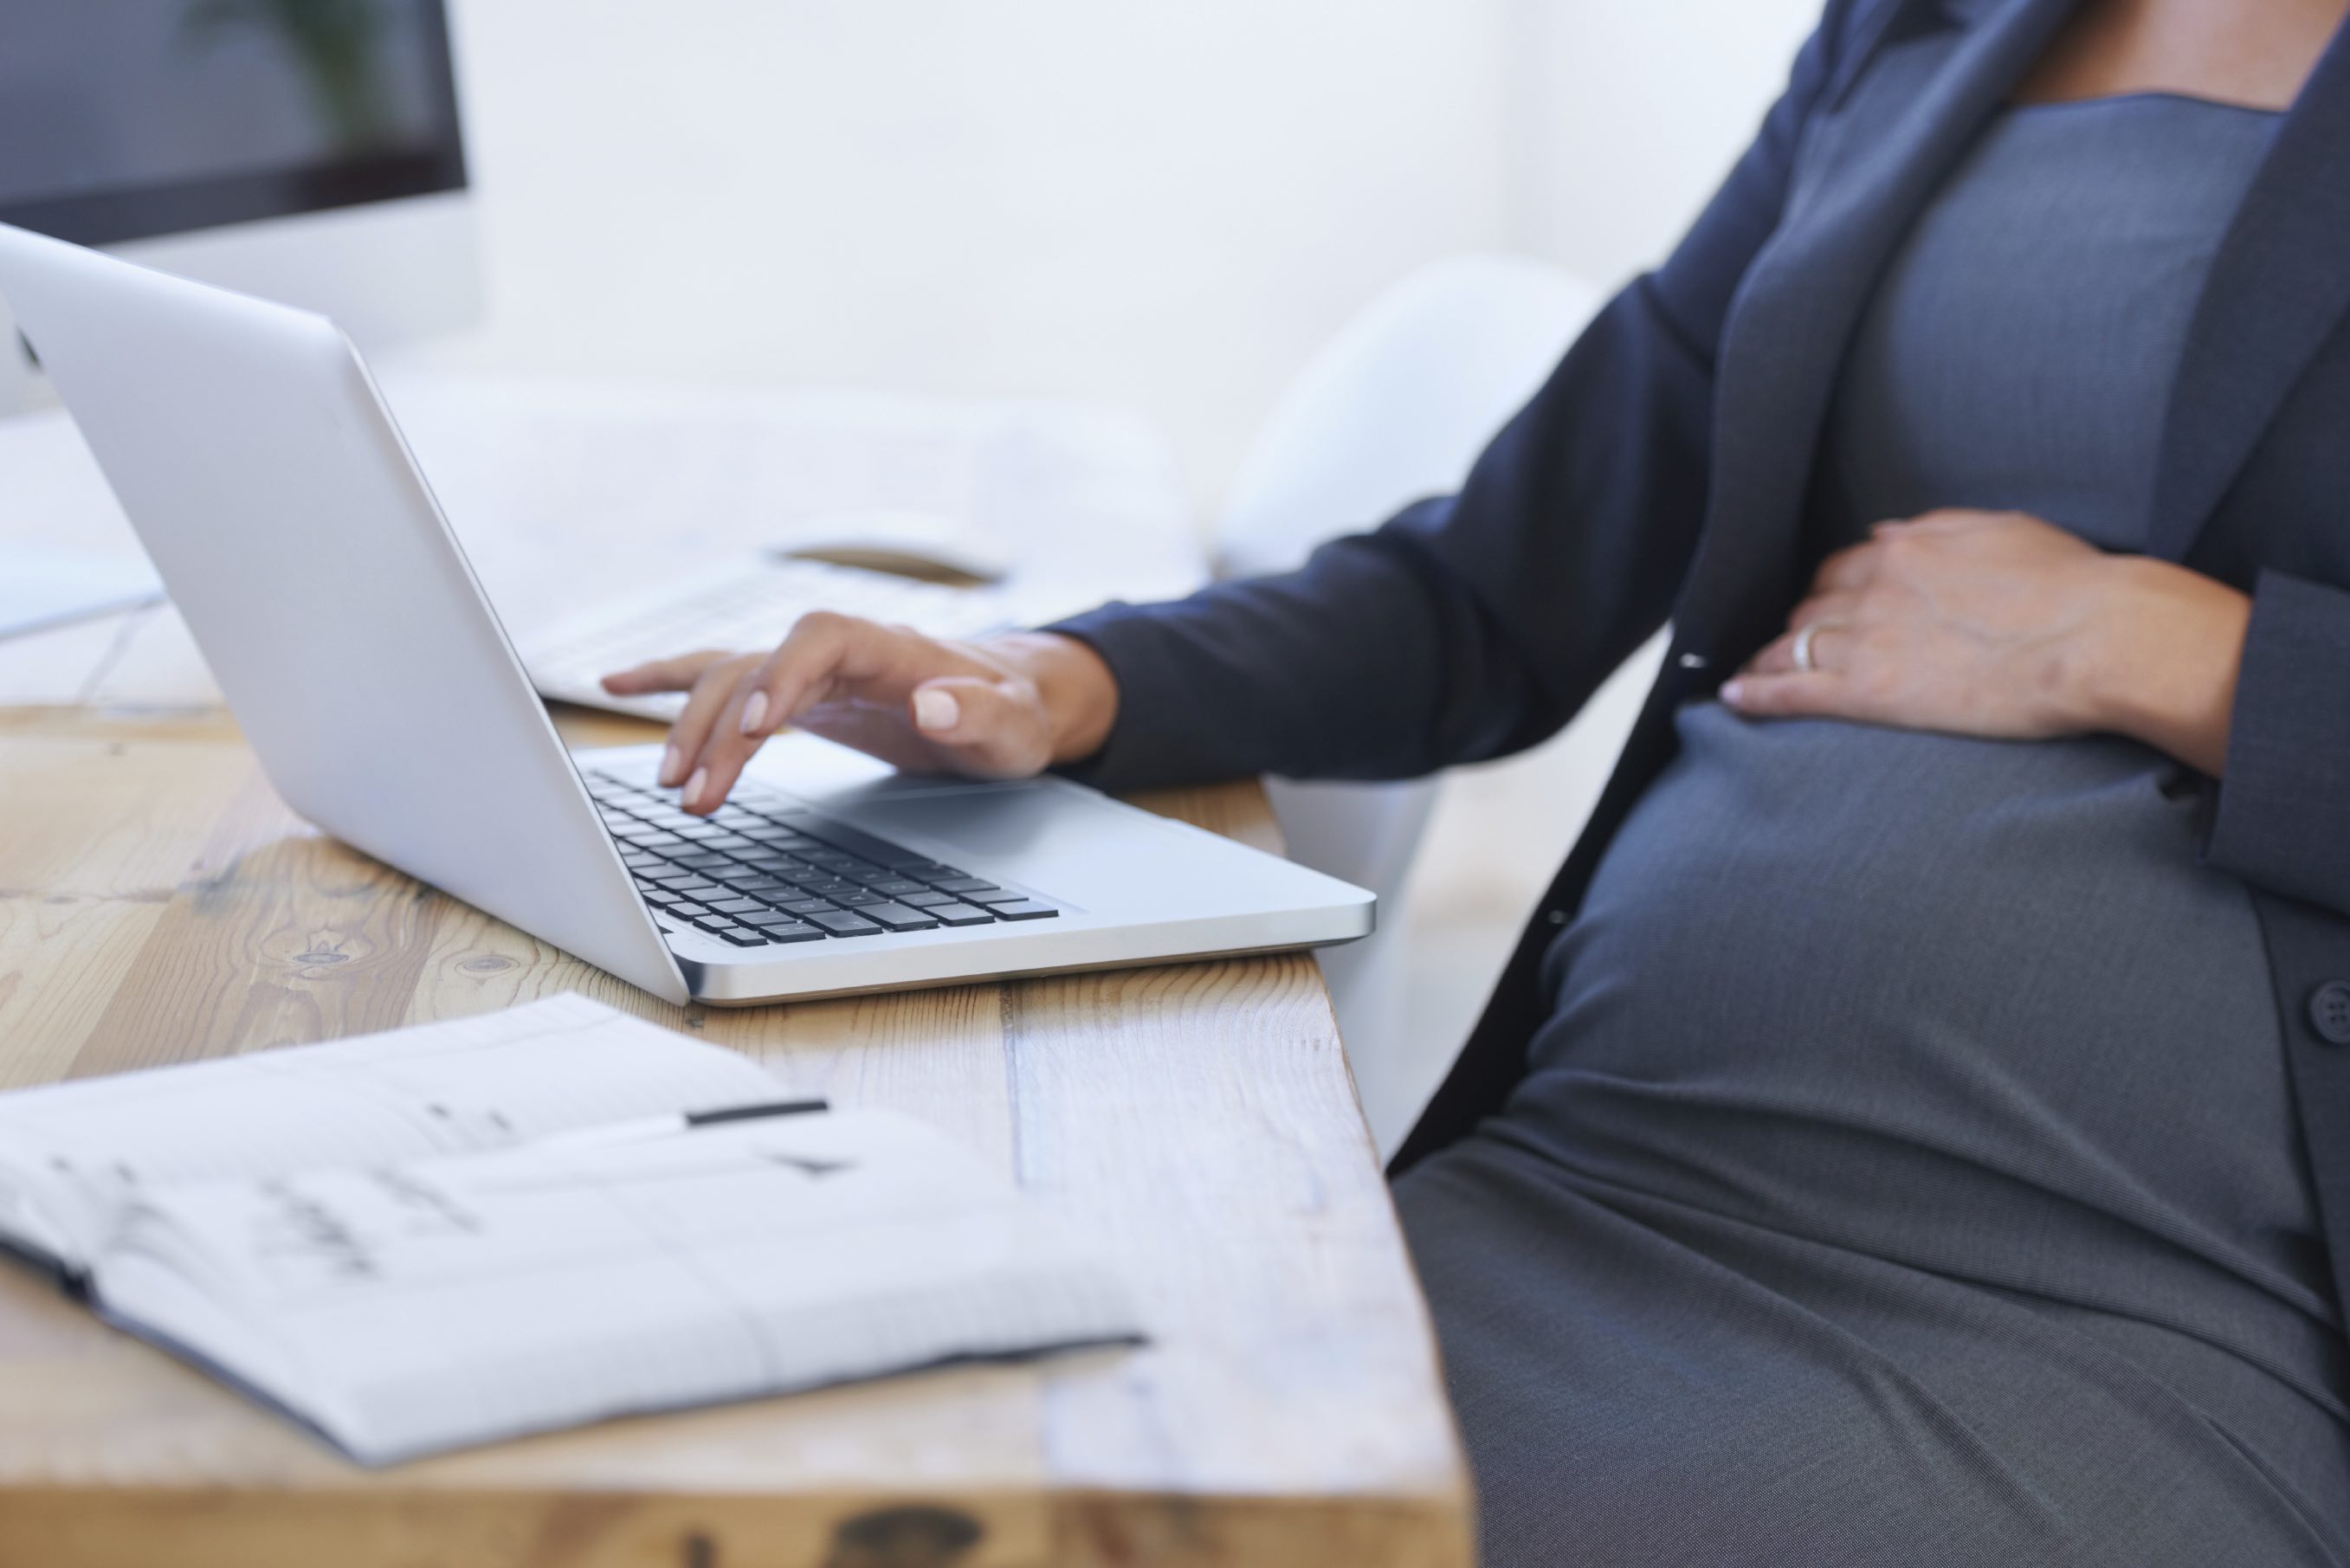 What to Expect When You’re Expecting (at Work)